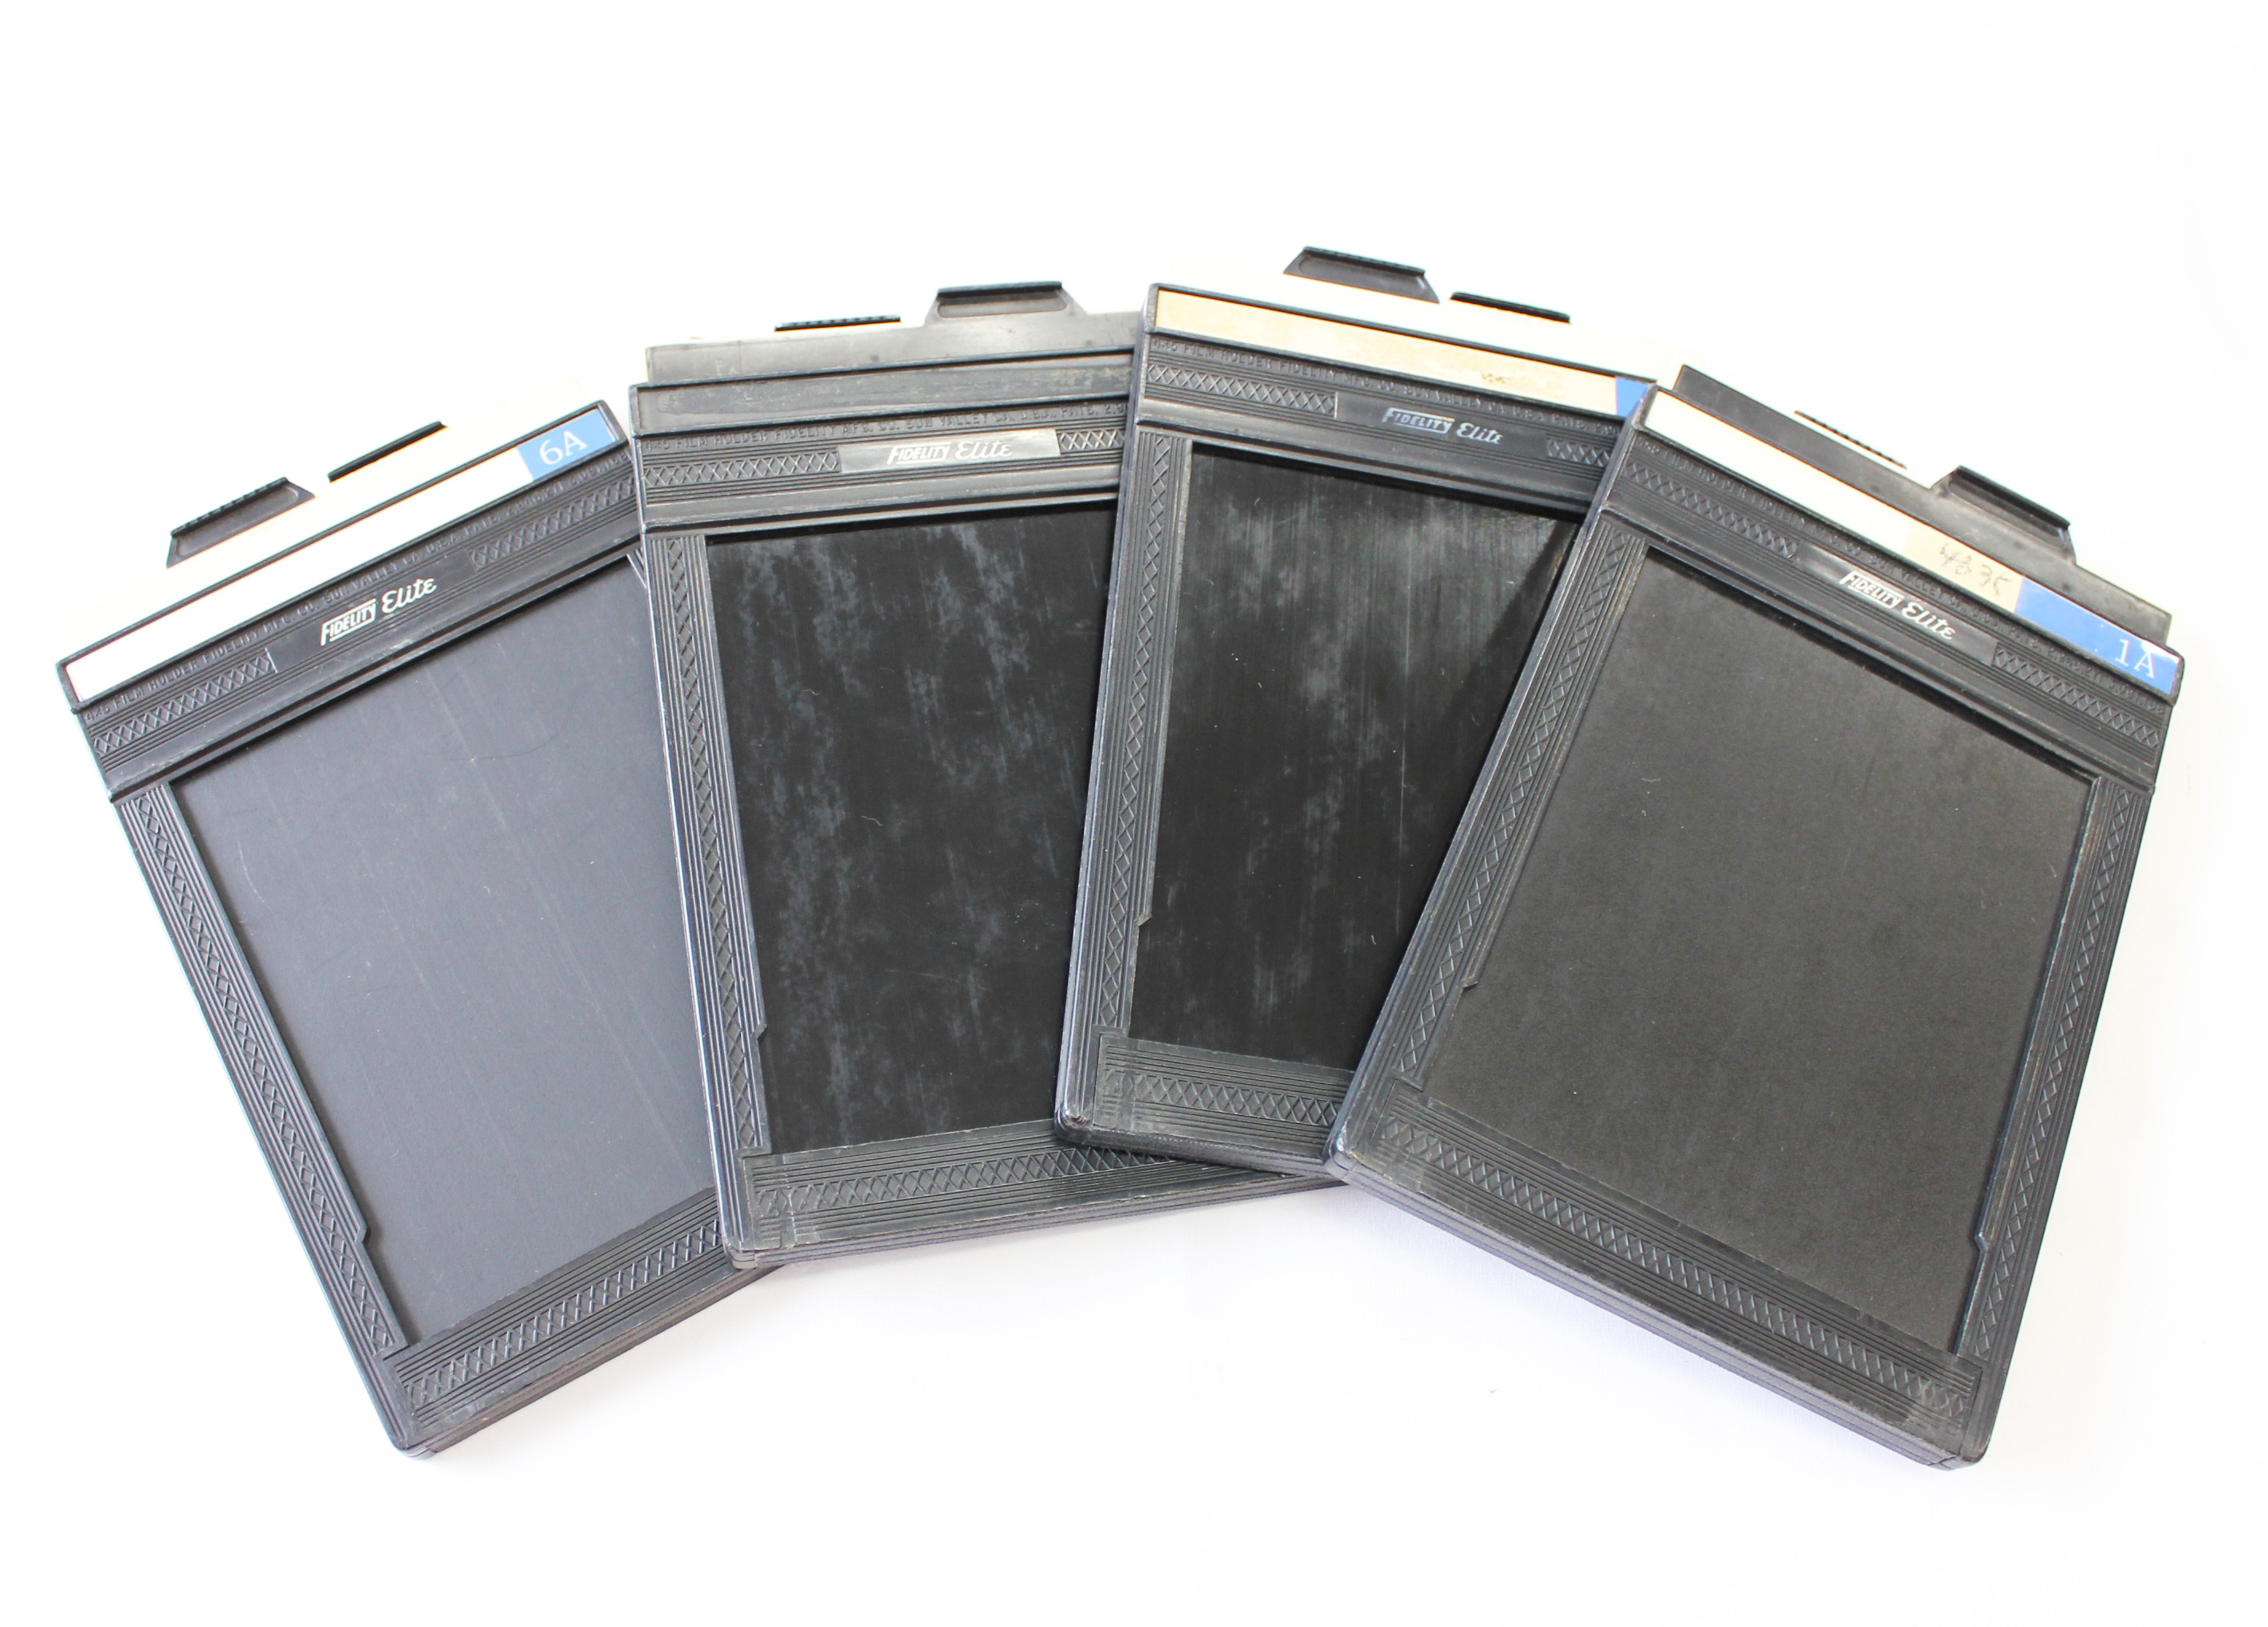 Fidelity 4x5 Cut Film Holder Lot of 4 from Japan